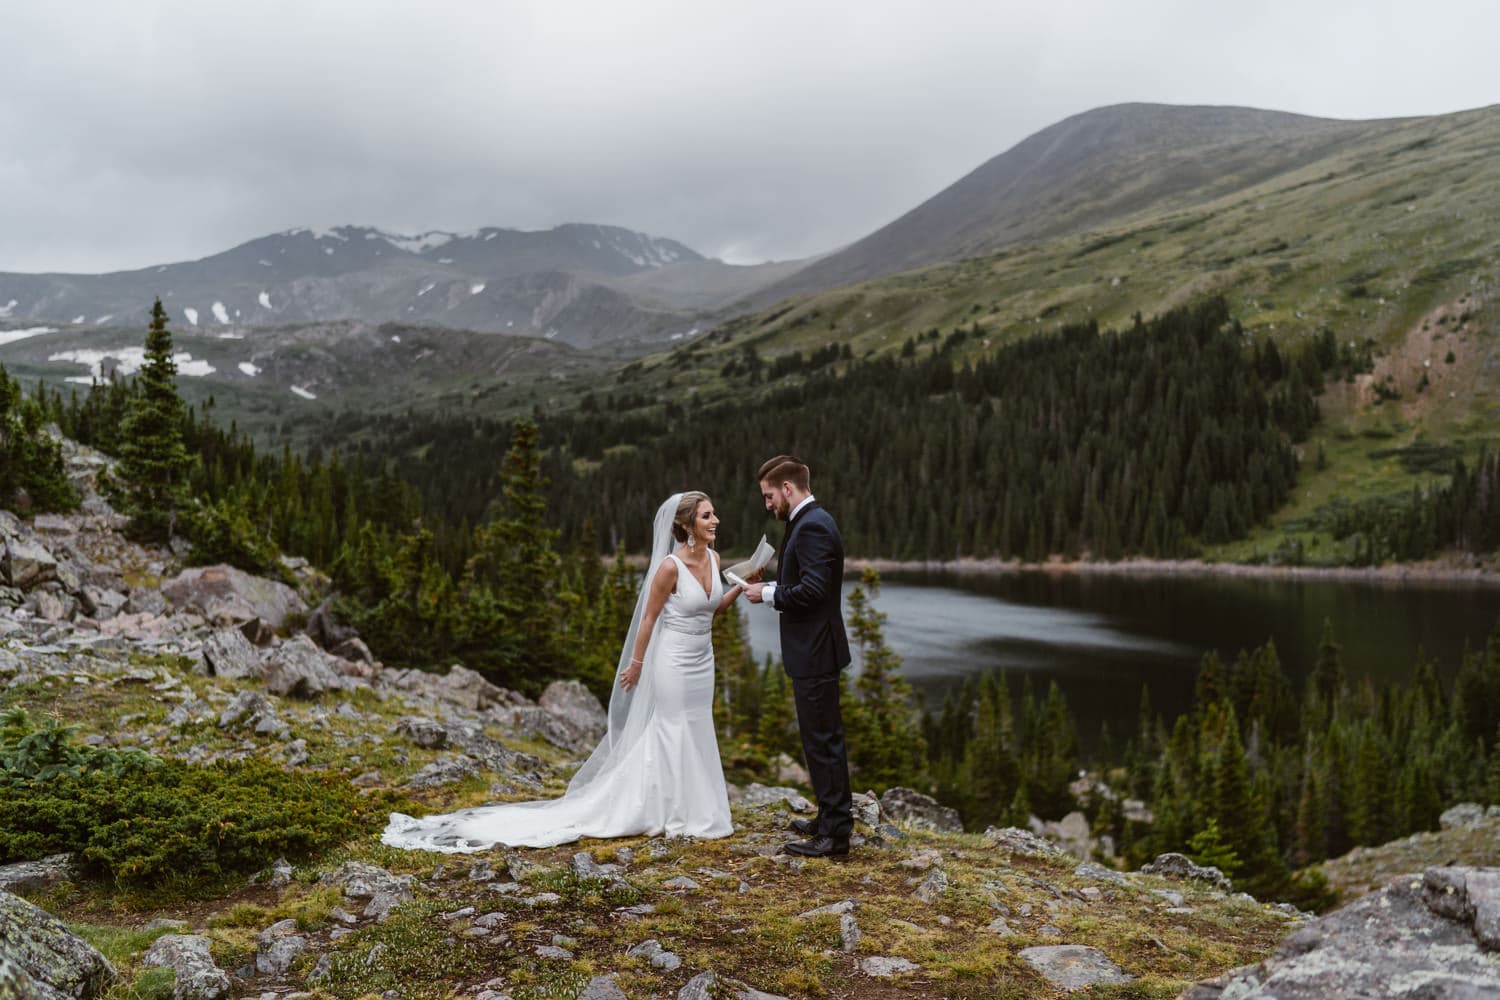 Bride and Groom Vow Ceremony at Georgetown, CO Elopement